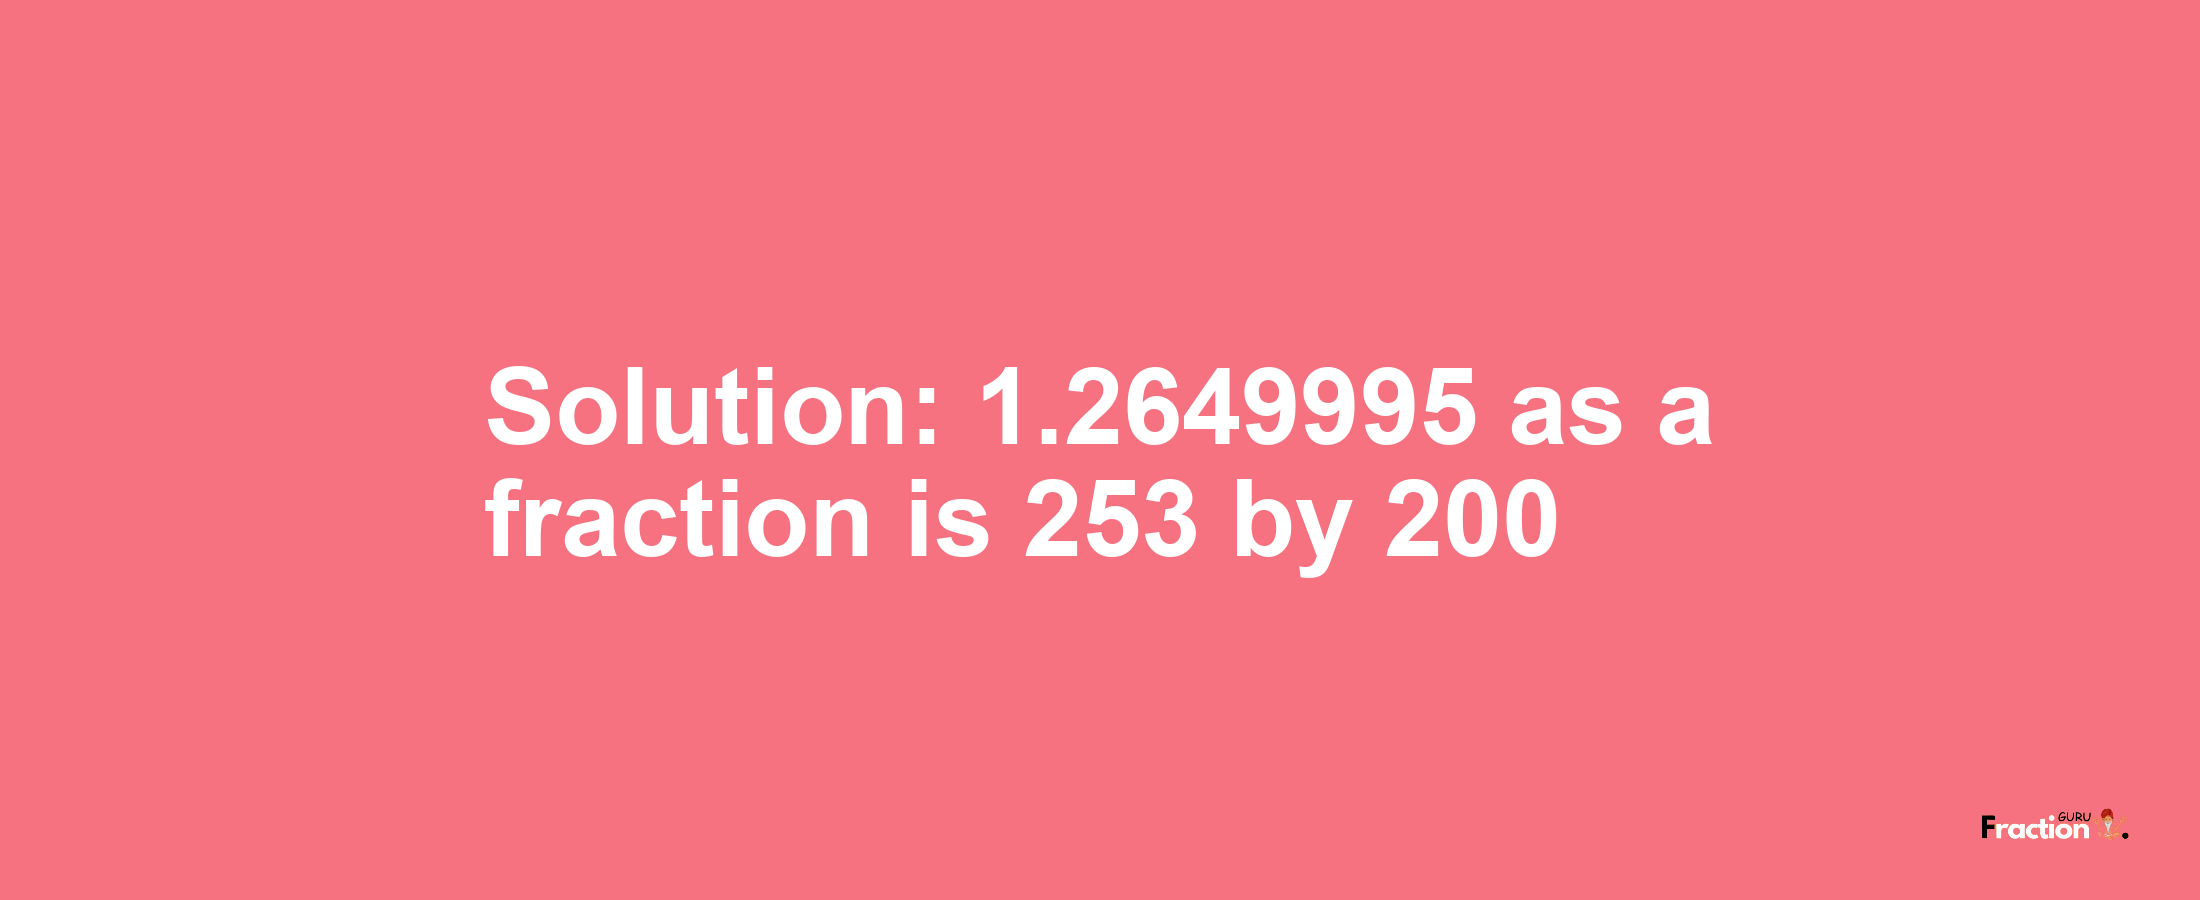 Solution:1.2649995 as a fraction is 253/200